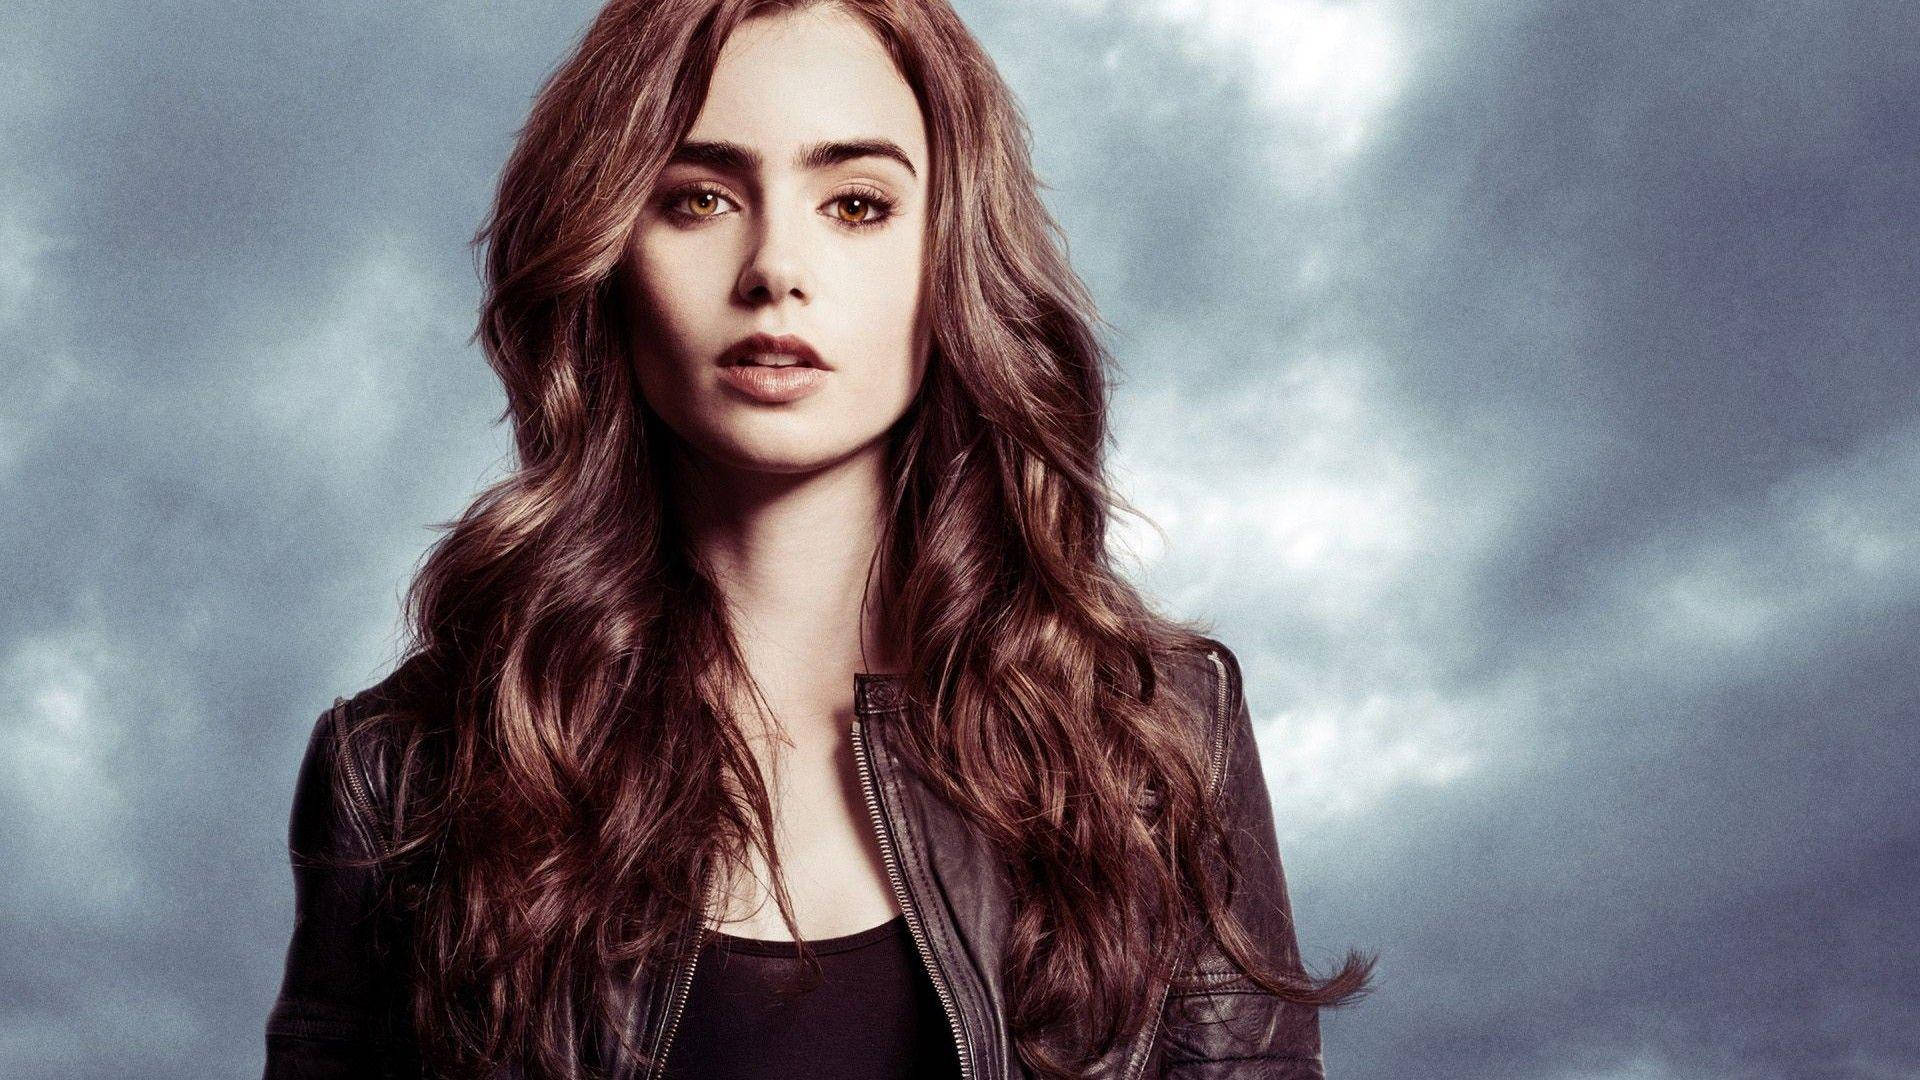 Lily Collins The Mortal Instruments